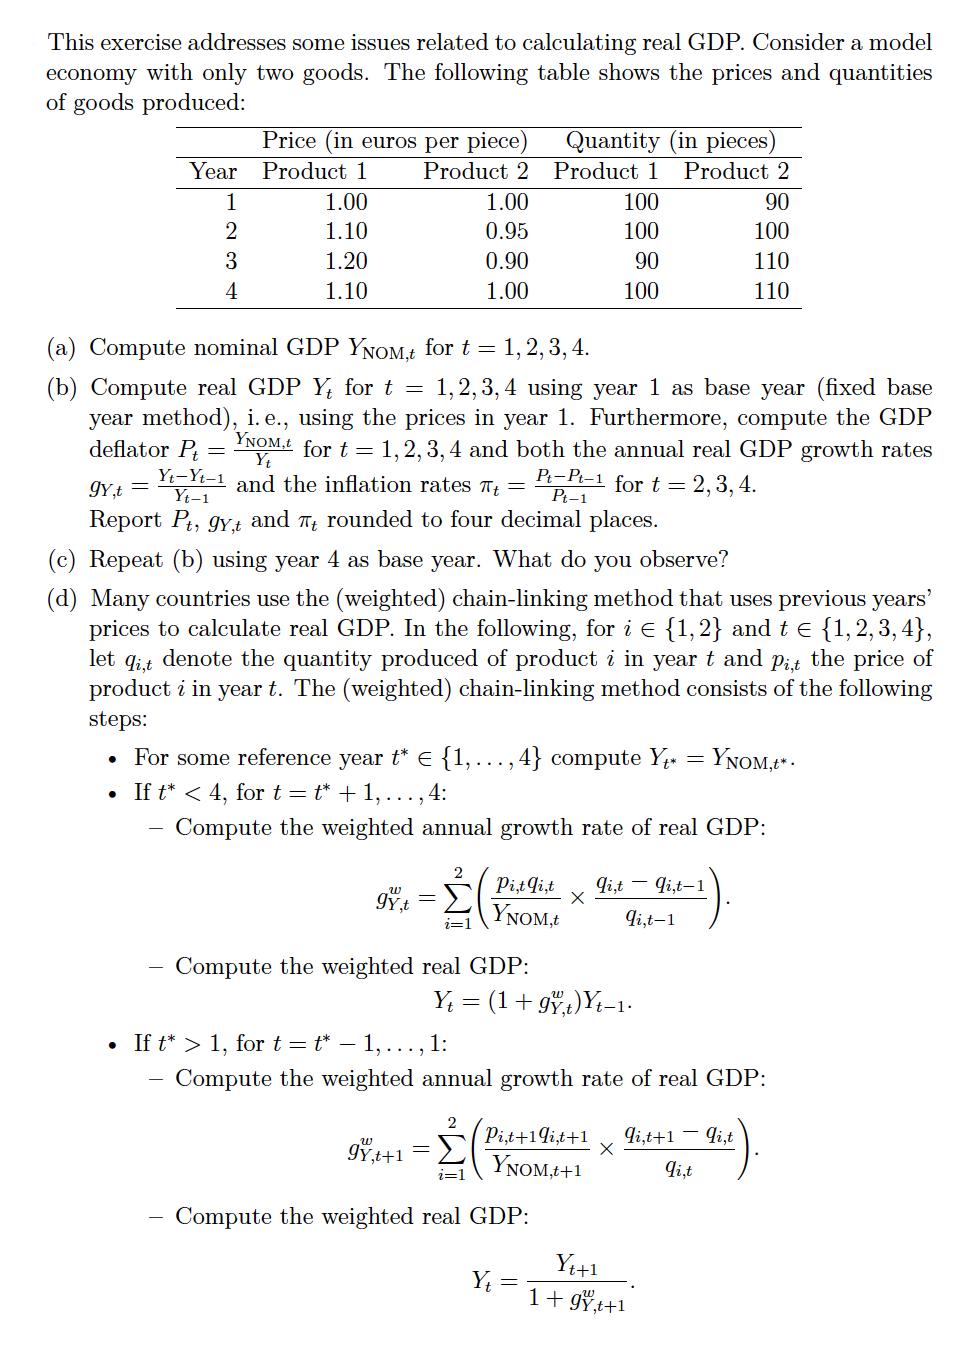 This exercise addresses some issues related to calculating real GDP. Consider a model economy with only two